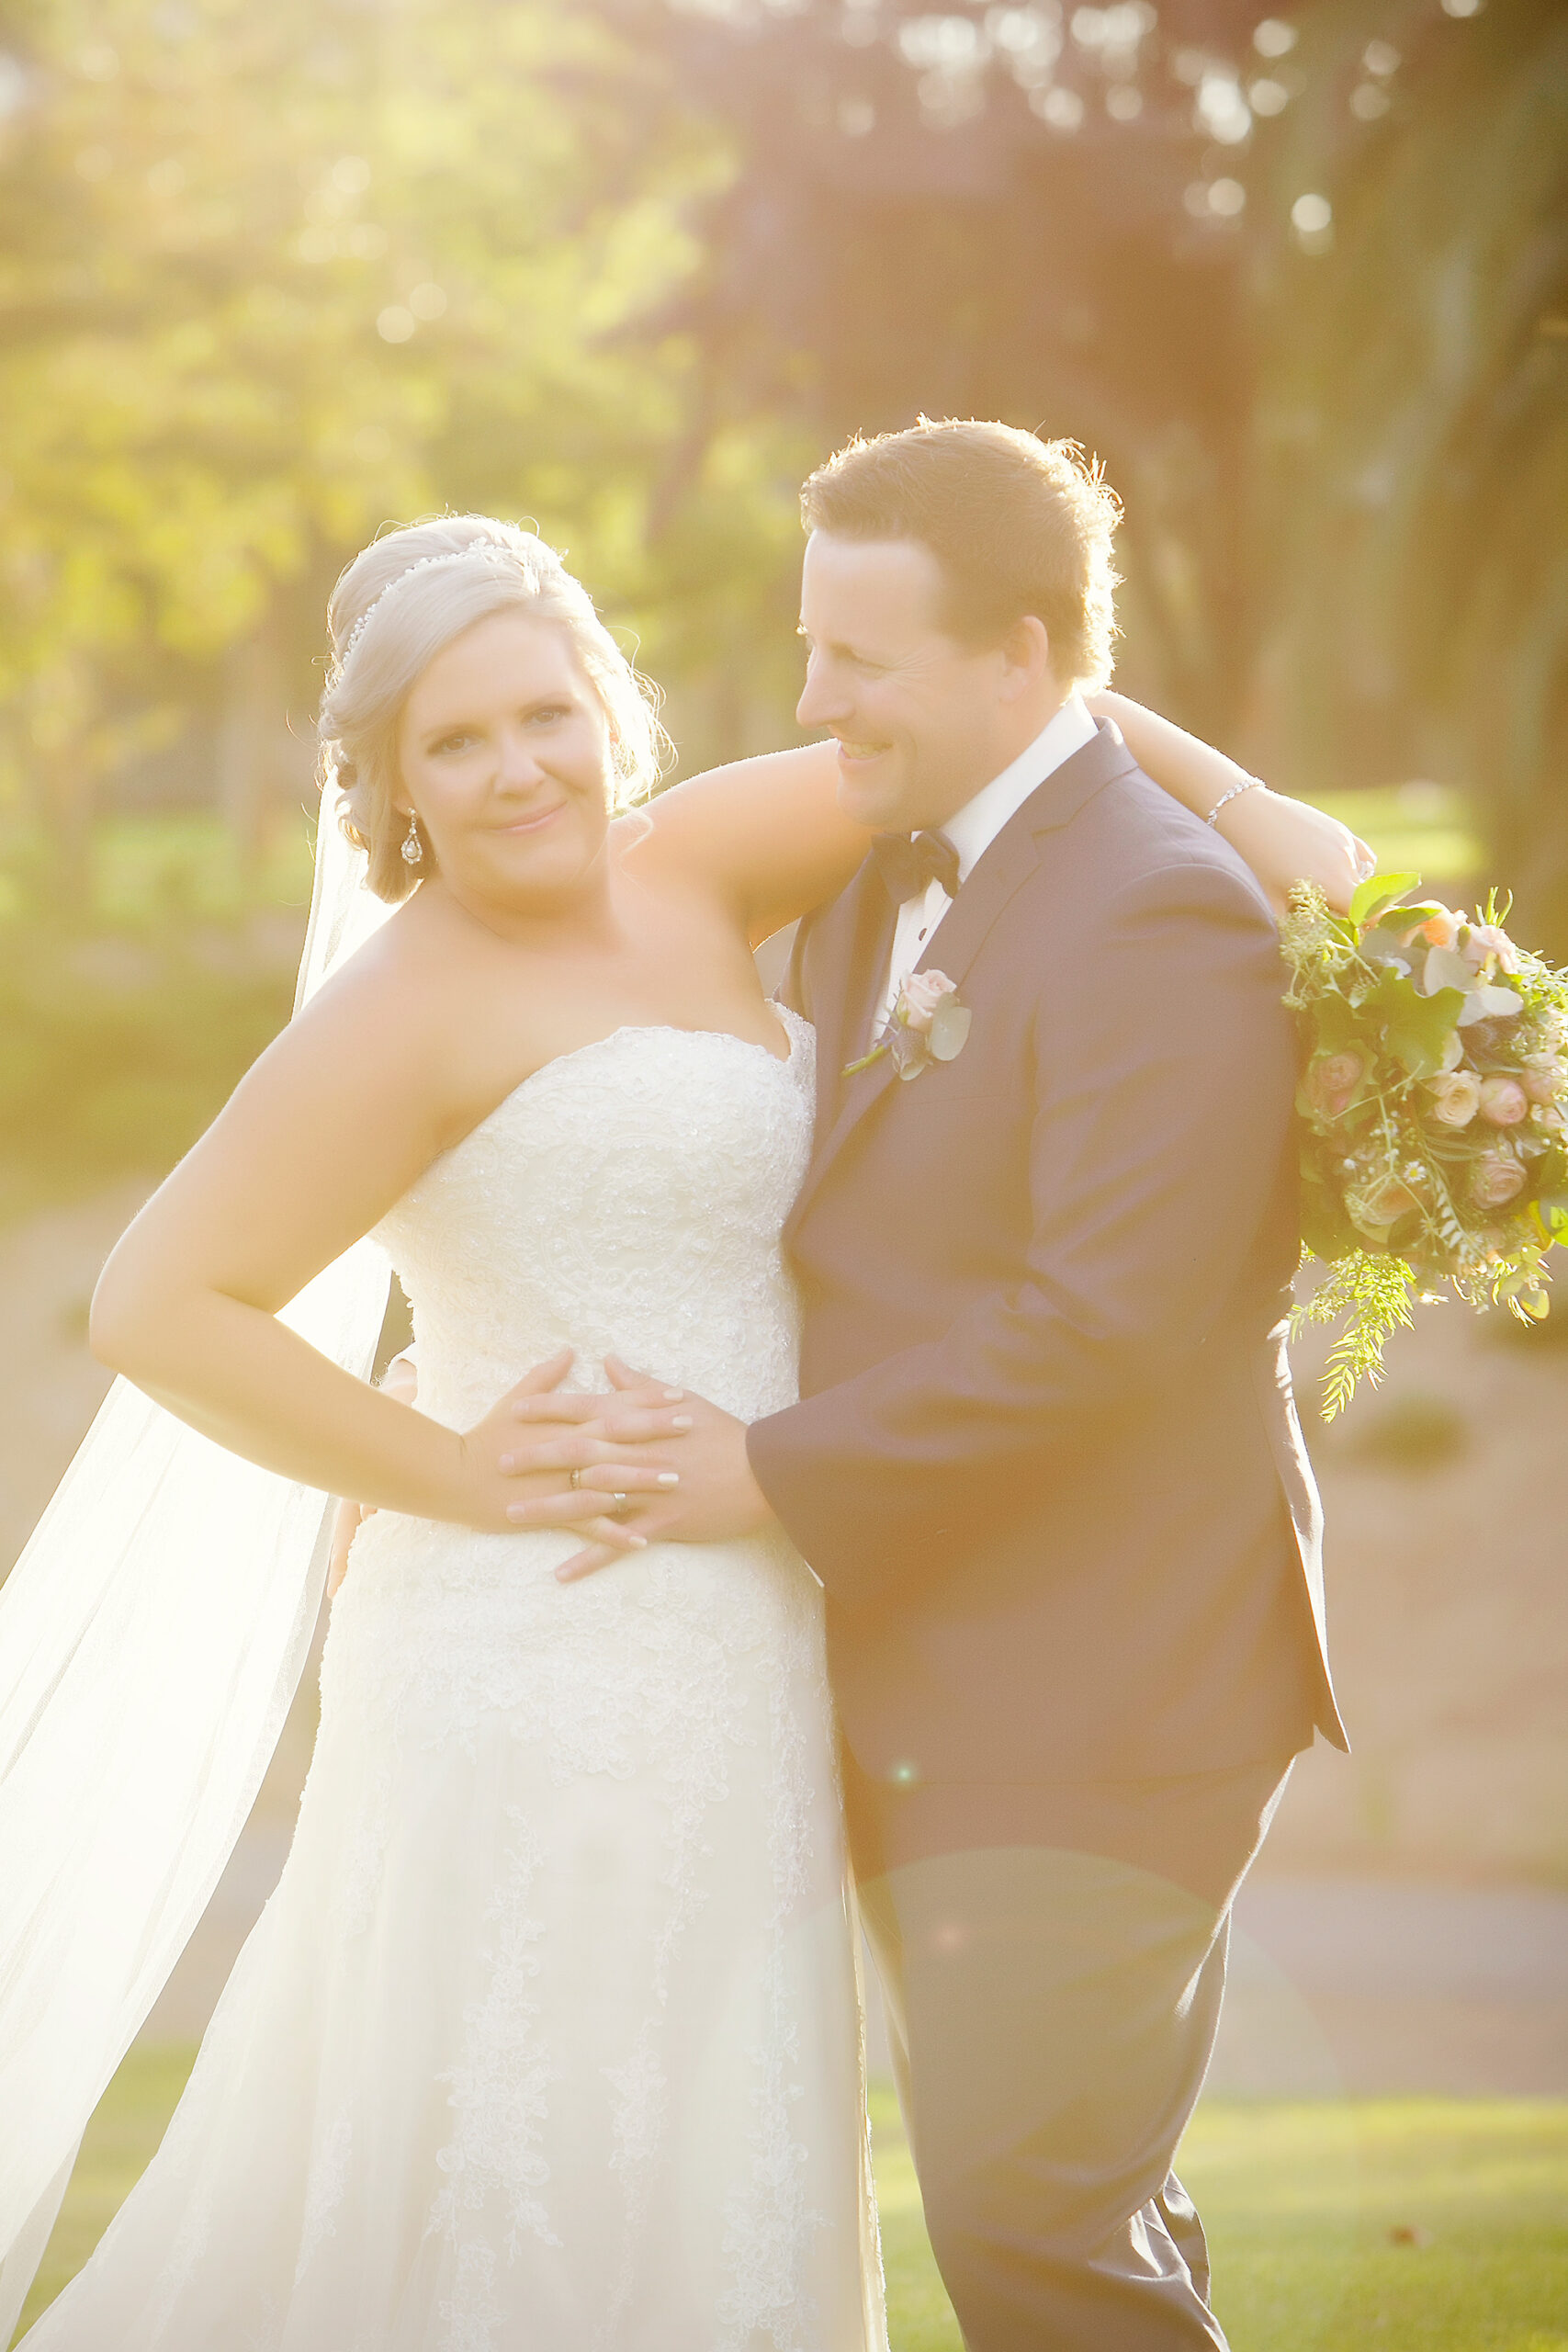 Jayne_Damian_Classic-Country-Wedding_Leanne-Whitley-Photography_SBS_010